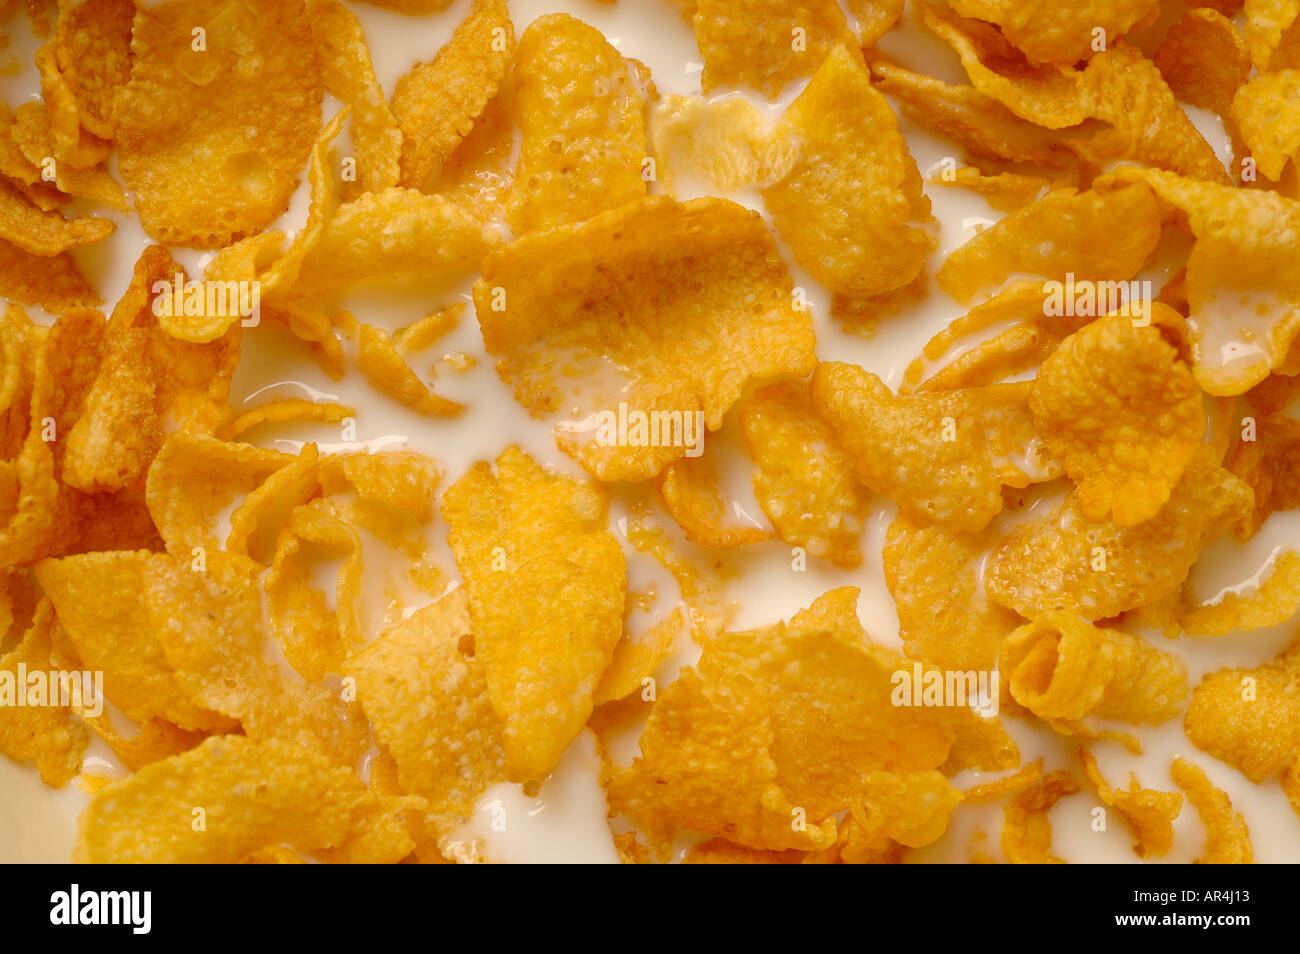 Corn flake cereal with milk Stock Photo